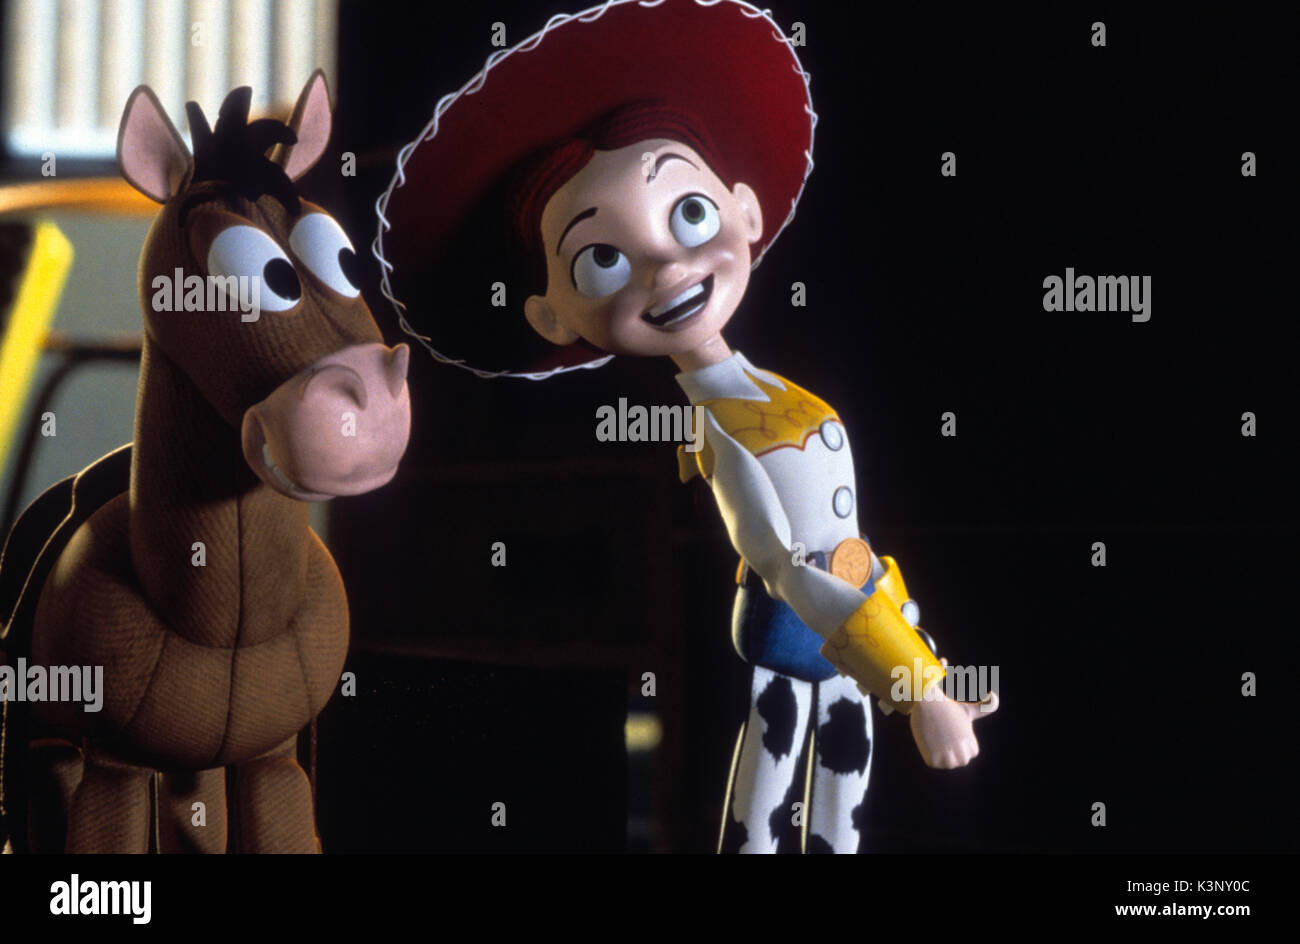 TOY STORY 2 [US 1999] Jessie the Yodelling Cowgirl voiced by Joan Cusack     Date: 1999 Stock Photo